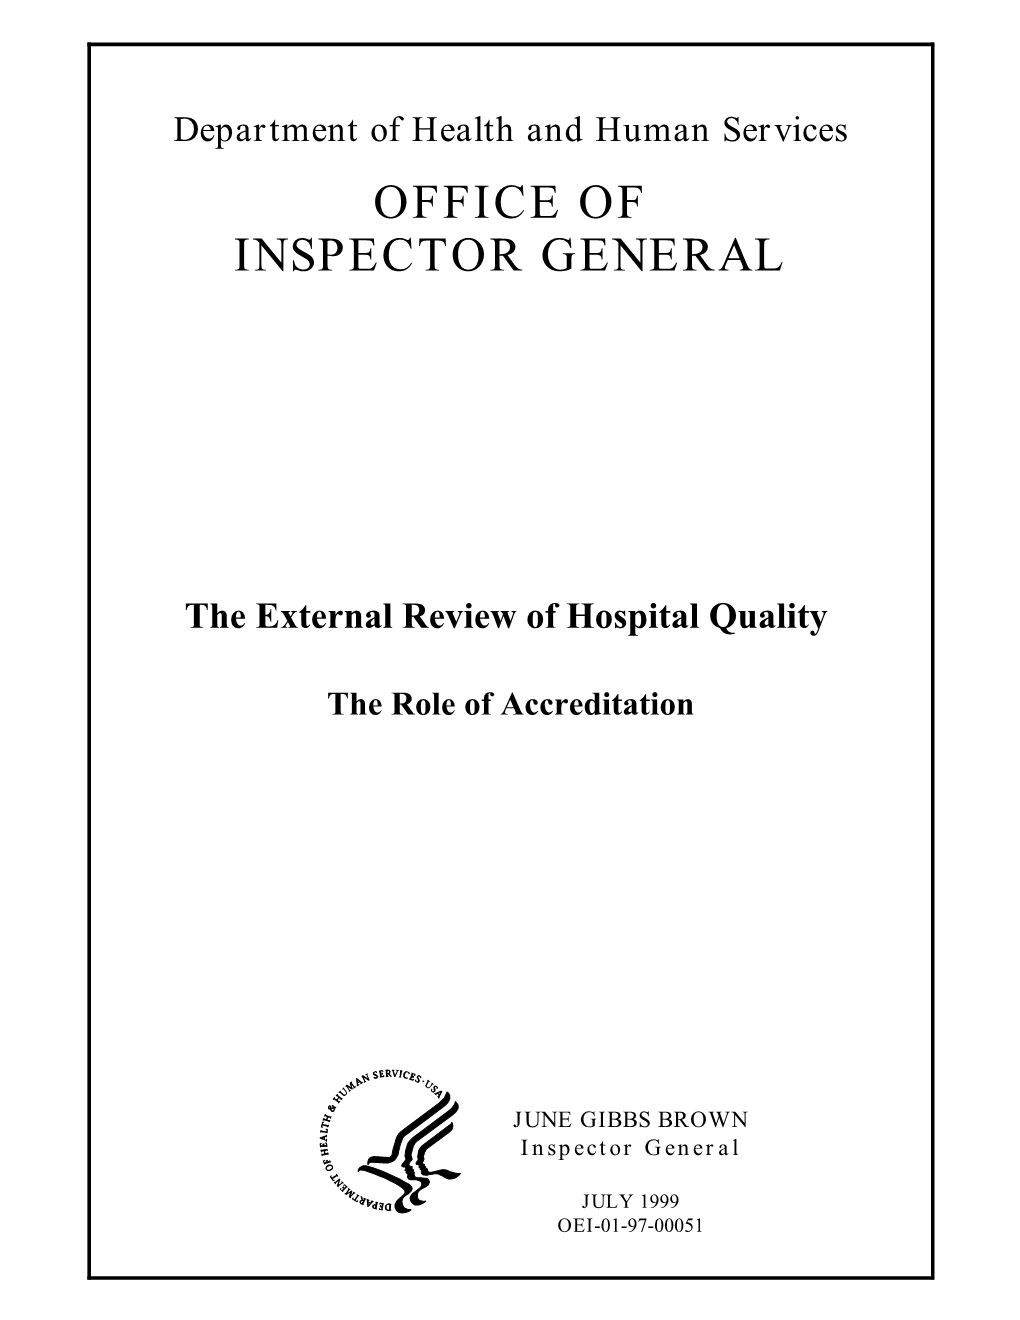 The External Review of Hospital Quality: the Role of Accreditation